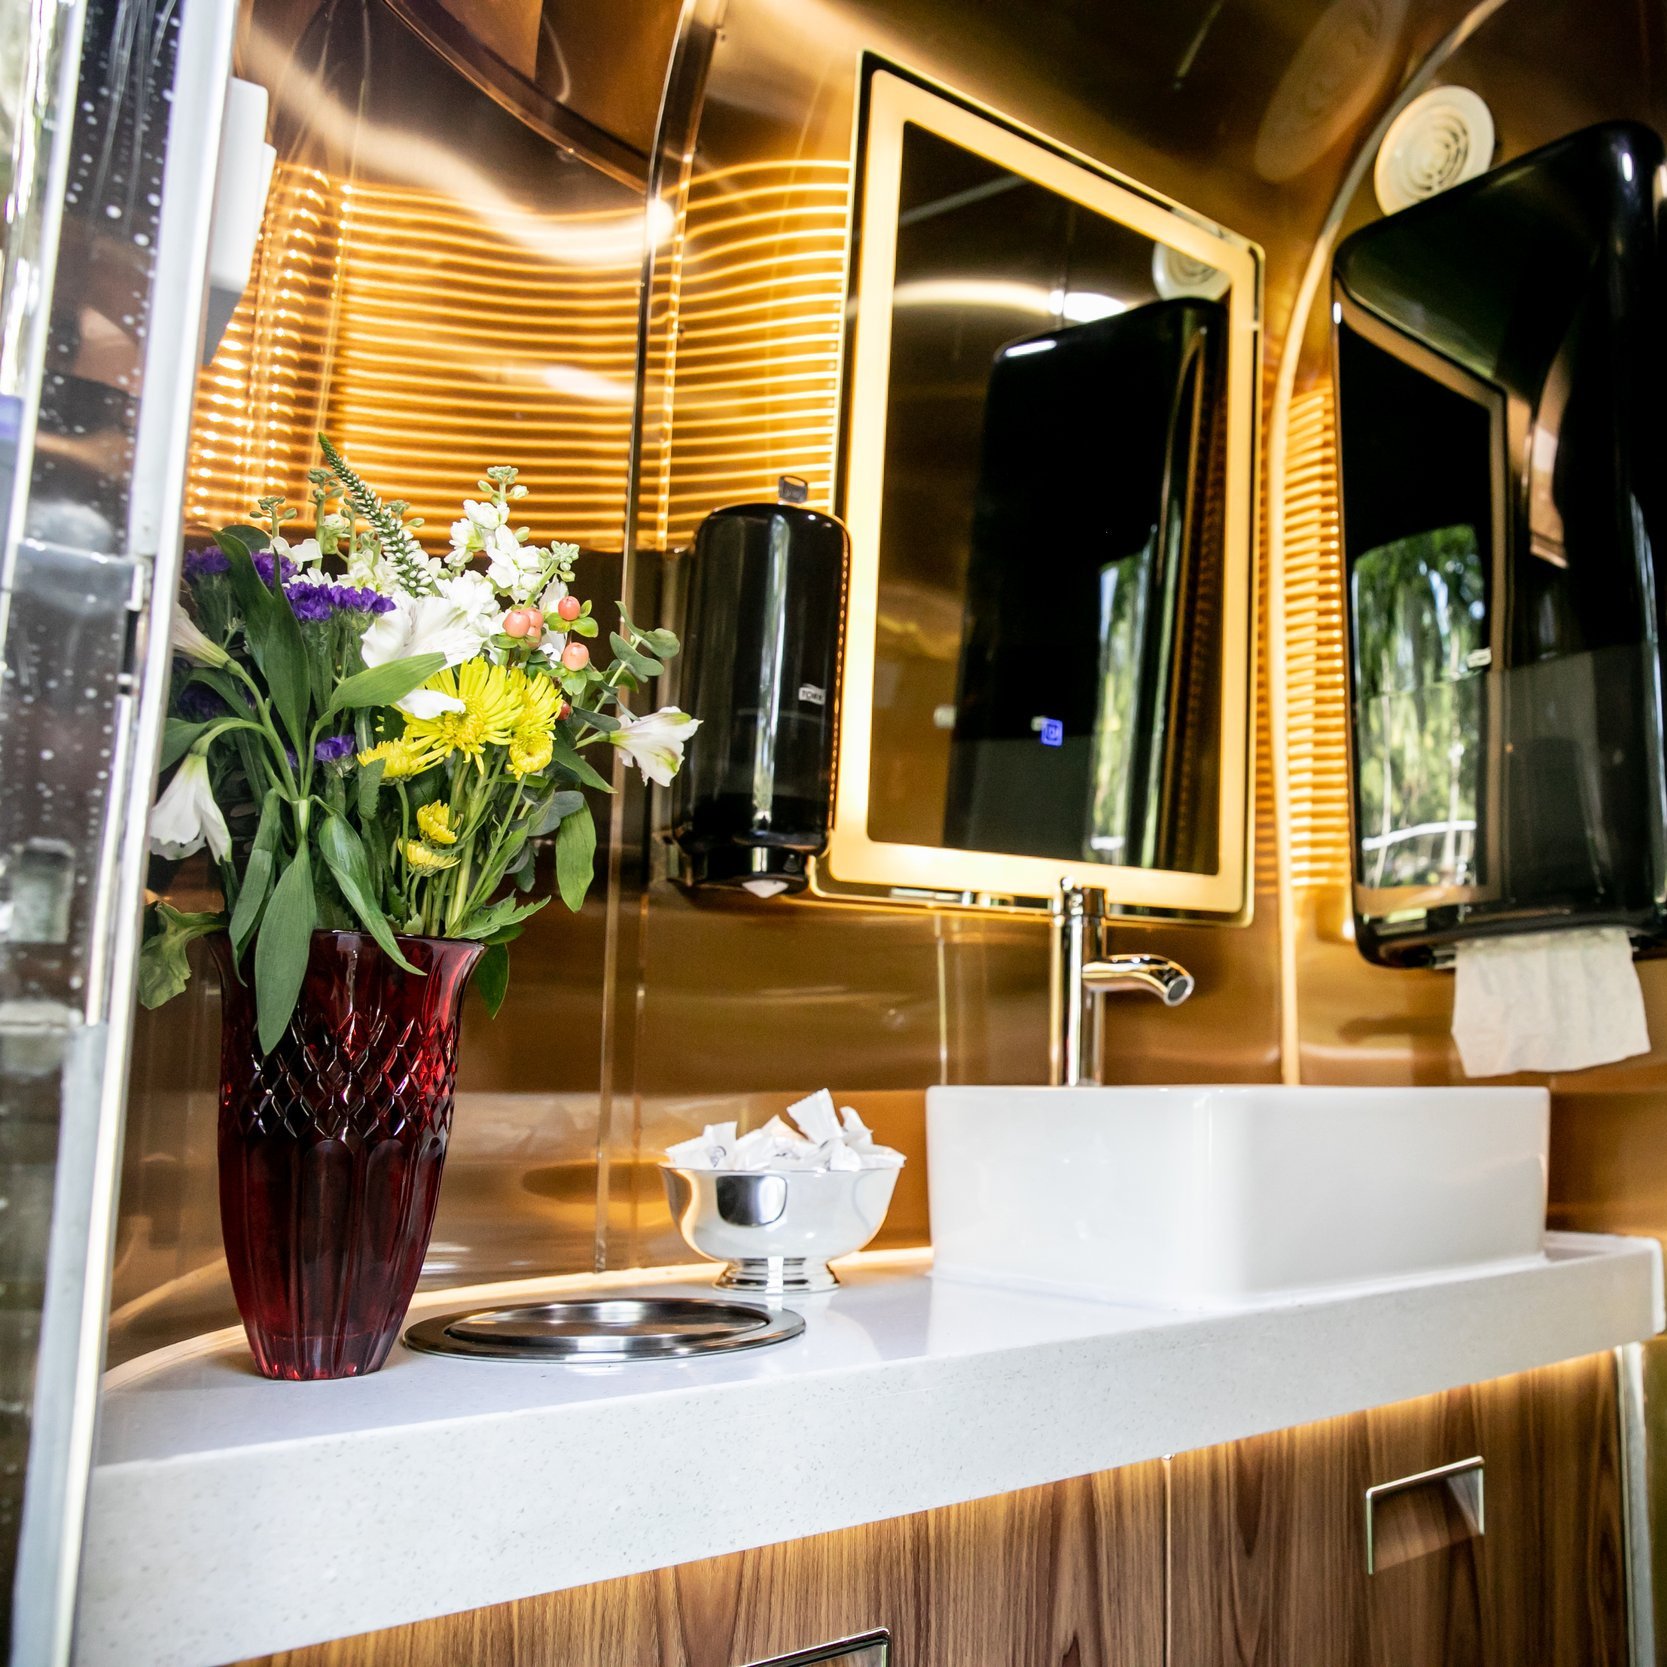 Gorgeous+Gold+Interior+on+Restrooms+for+Events.jpg